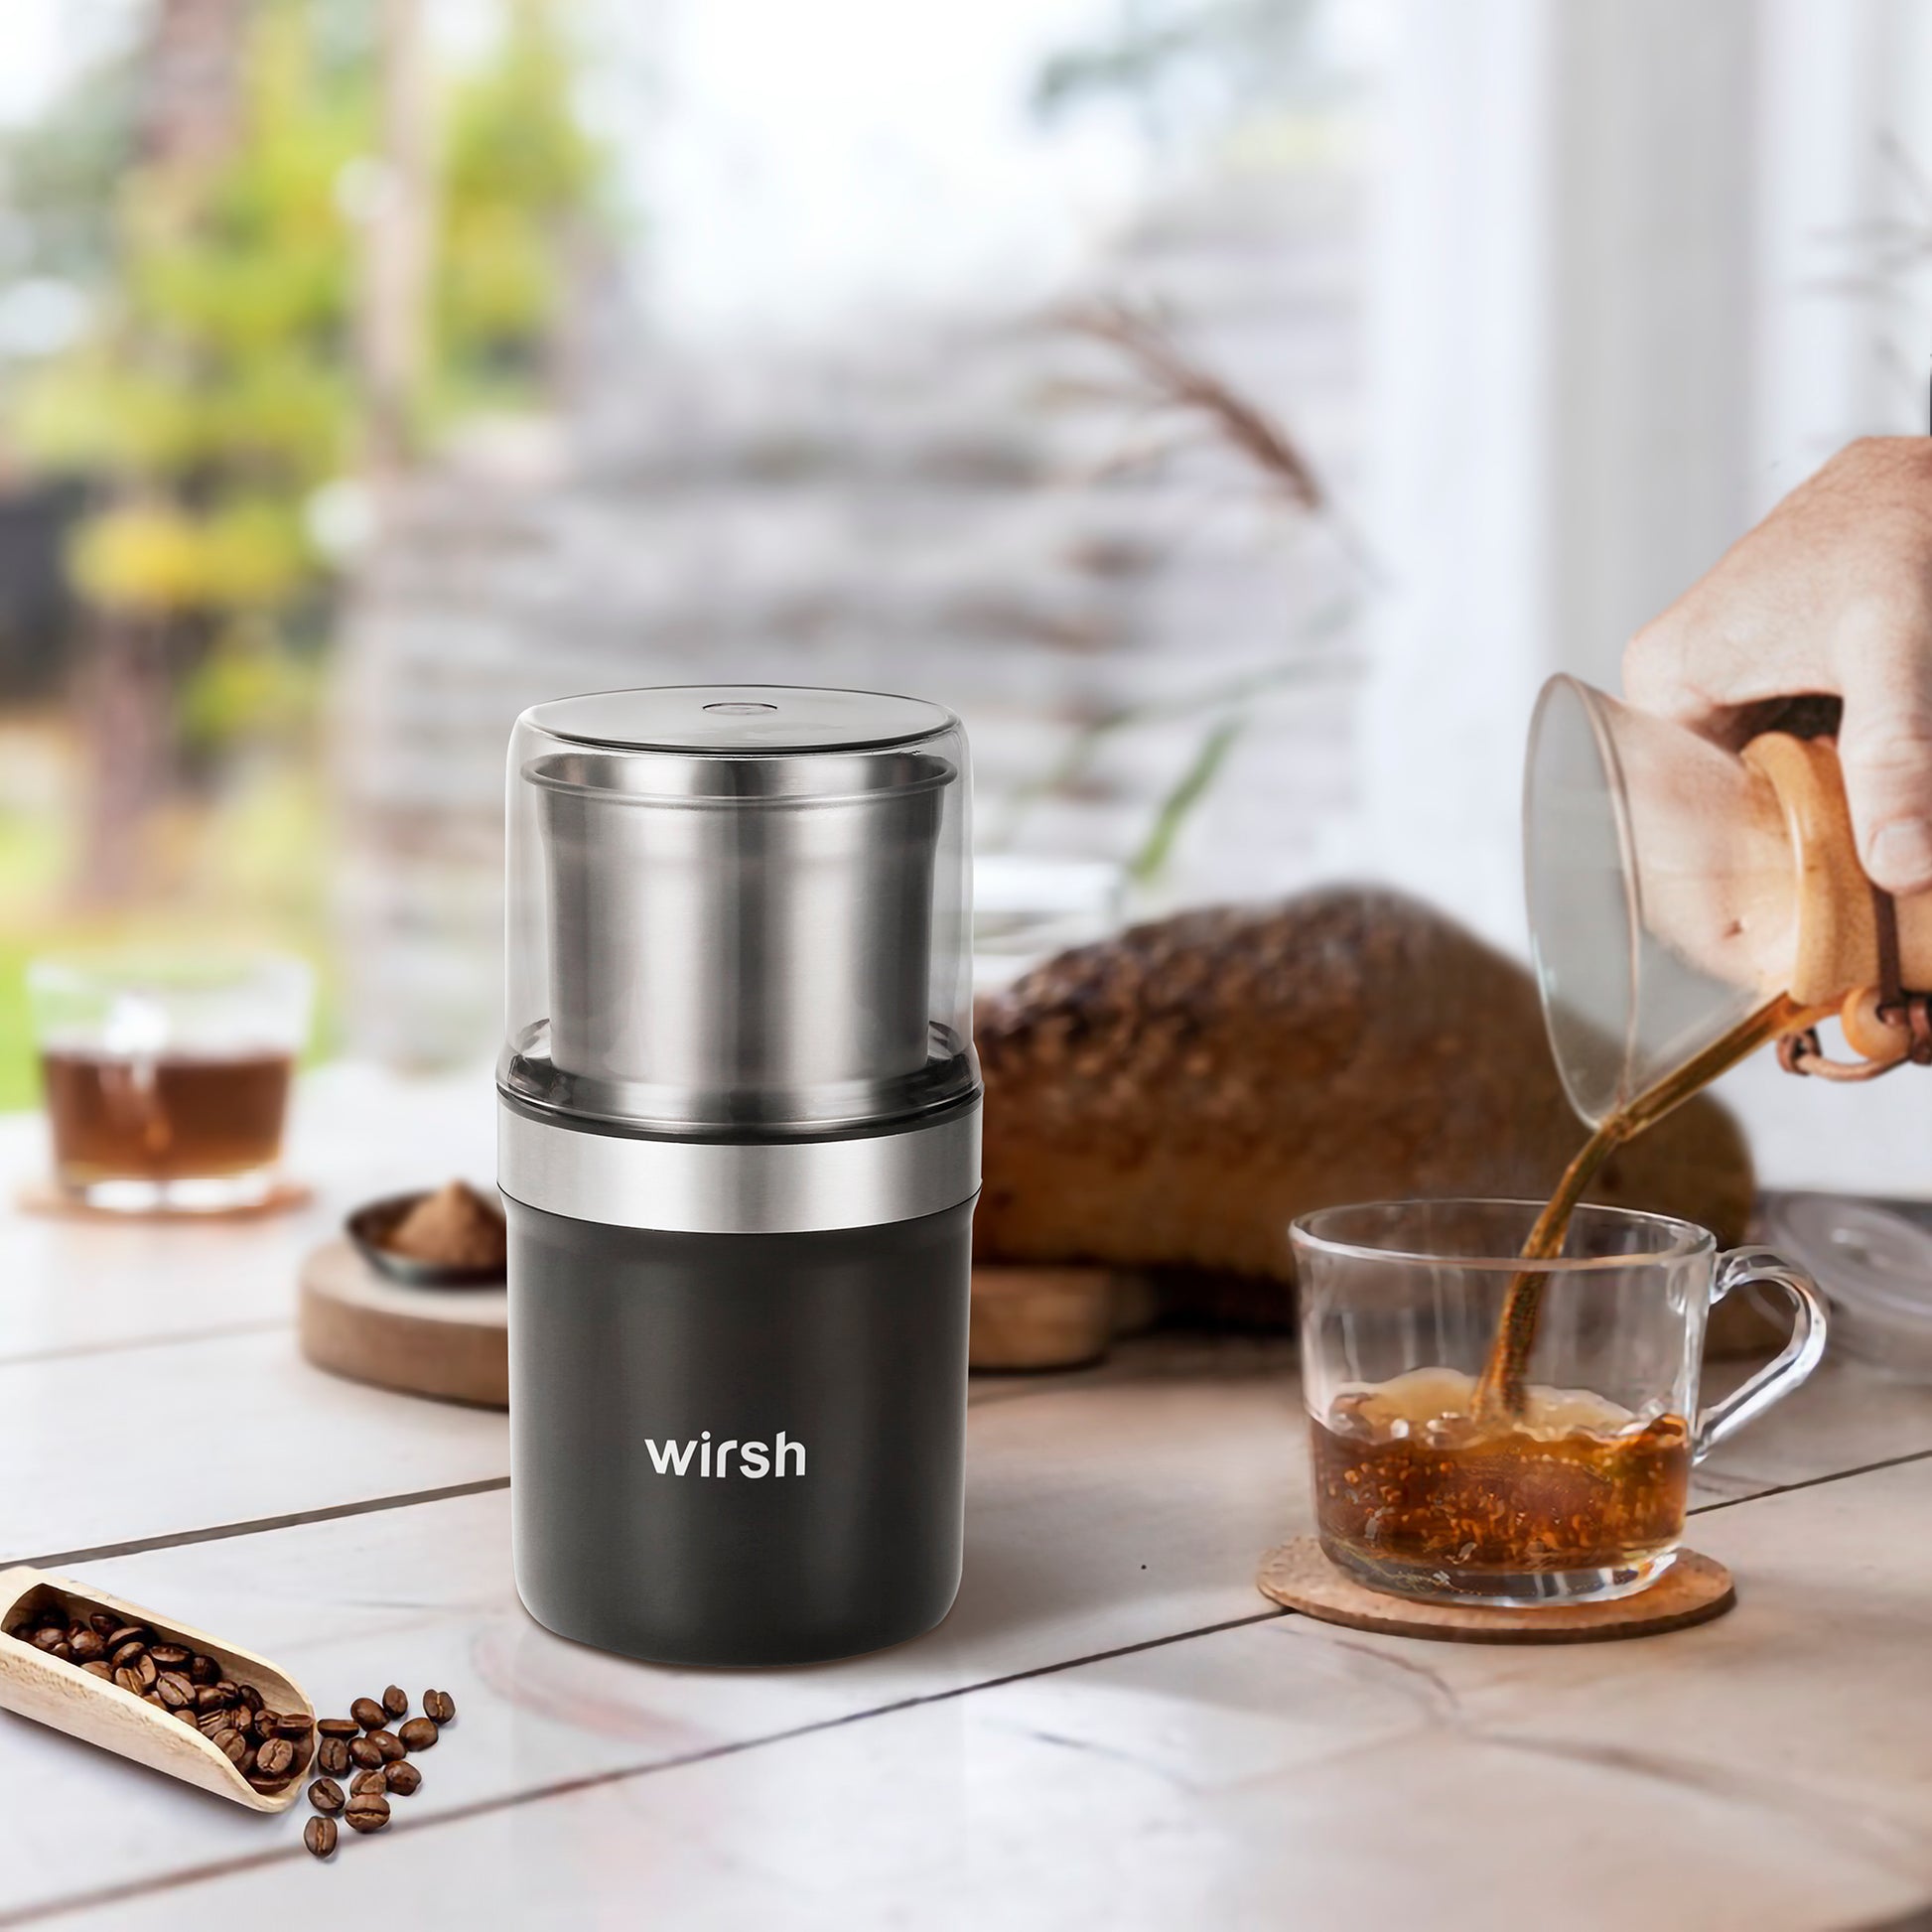 Wirsh Coffee Grinder-Electric Herb Spice Grinder with 5.3oz. Stainless Steel Removable Bowl and 200W Motor for Herbs,Spices,Coffee Beans,Nuts,Grains